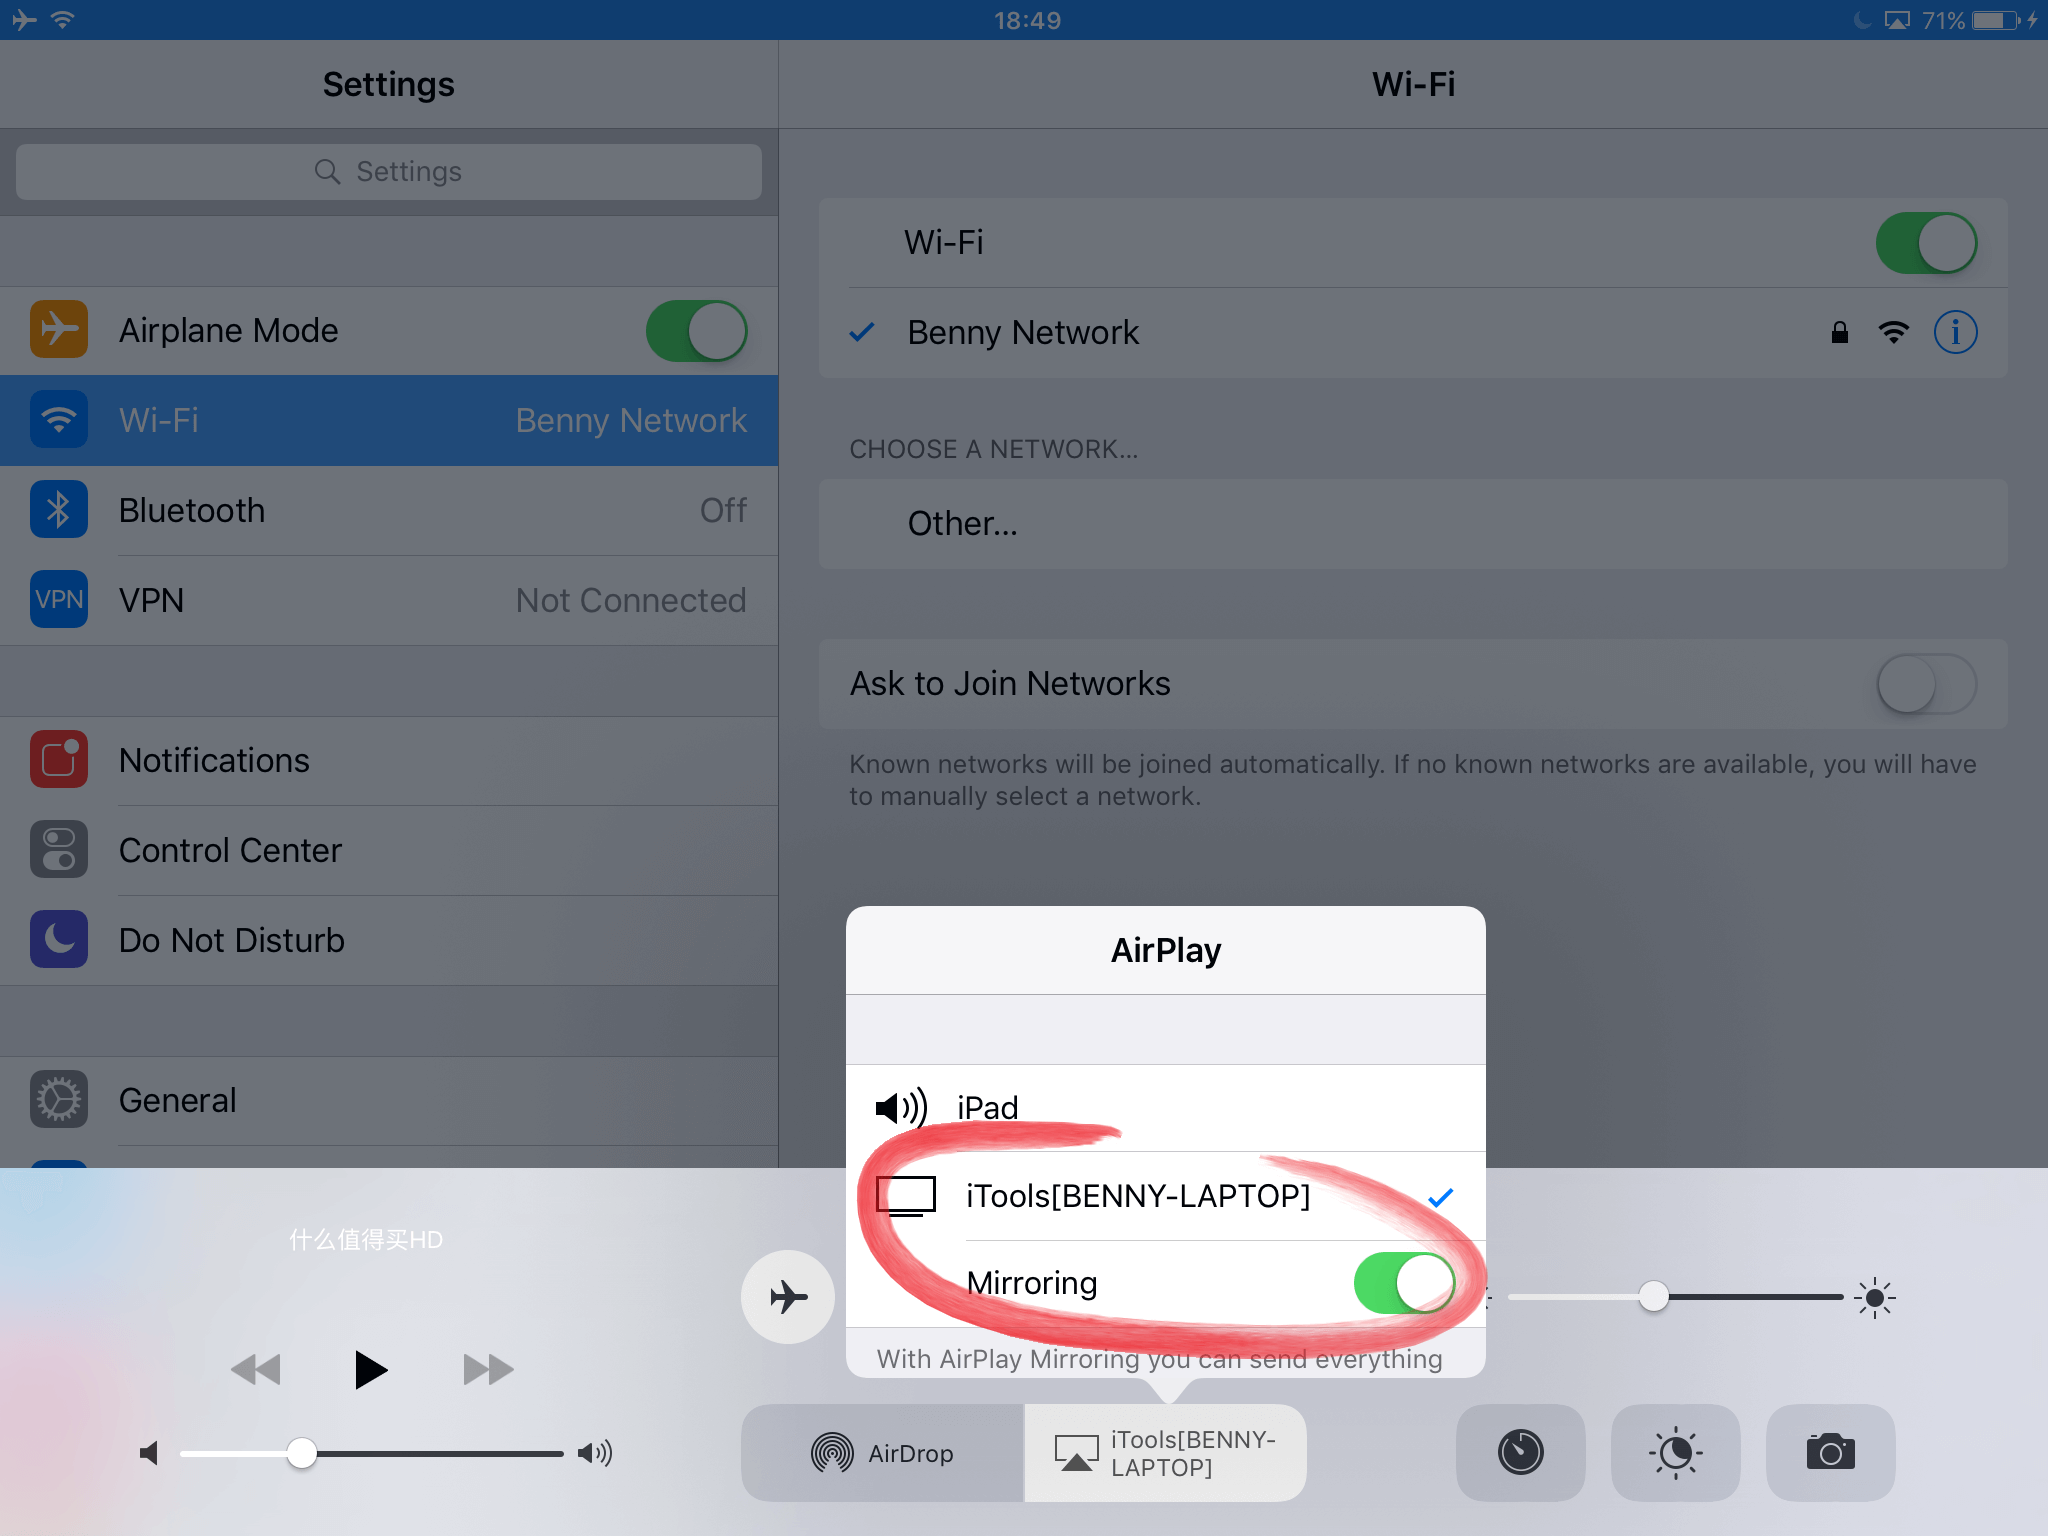 Option for Airplay